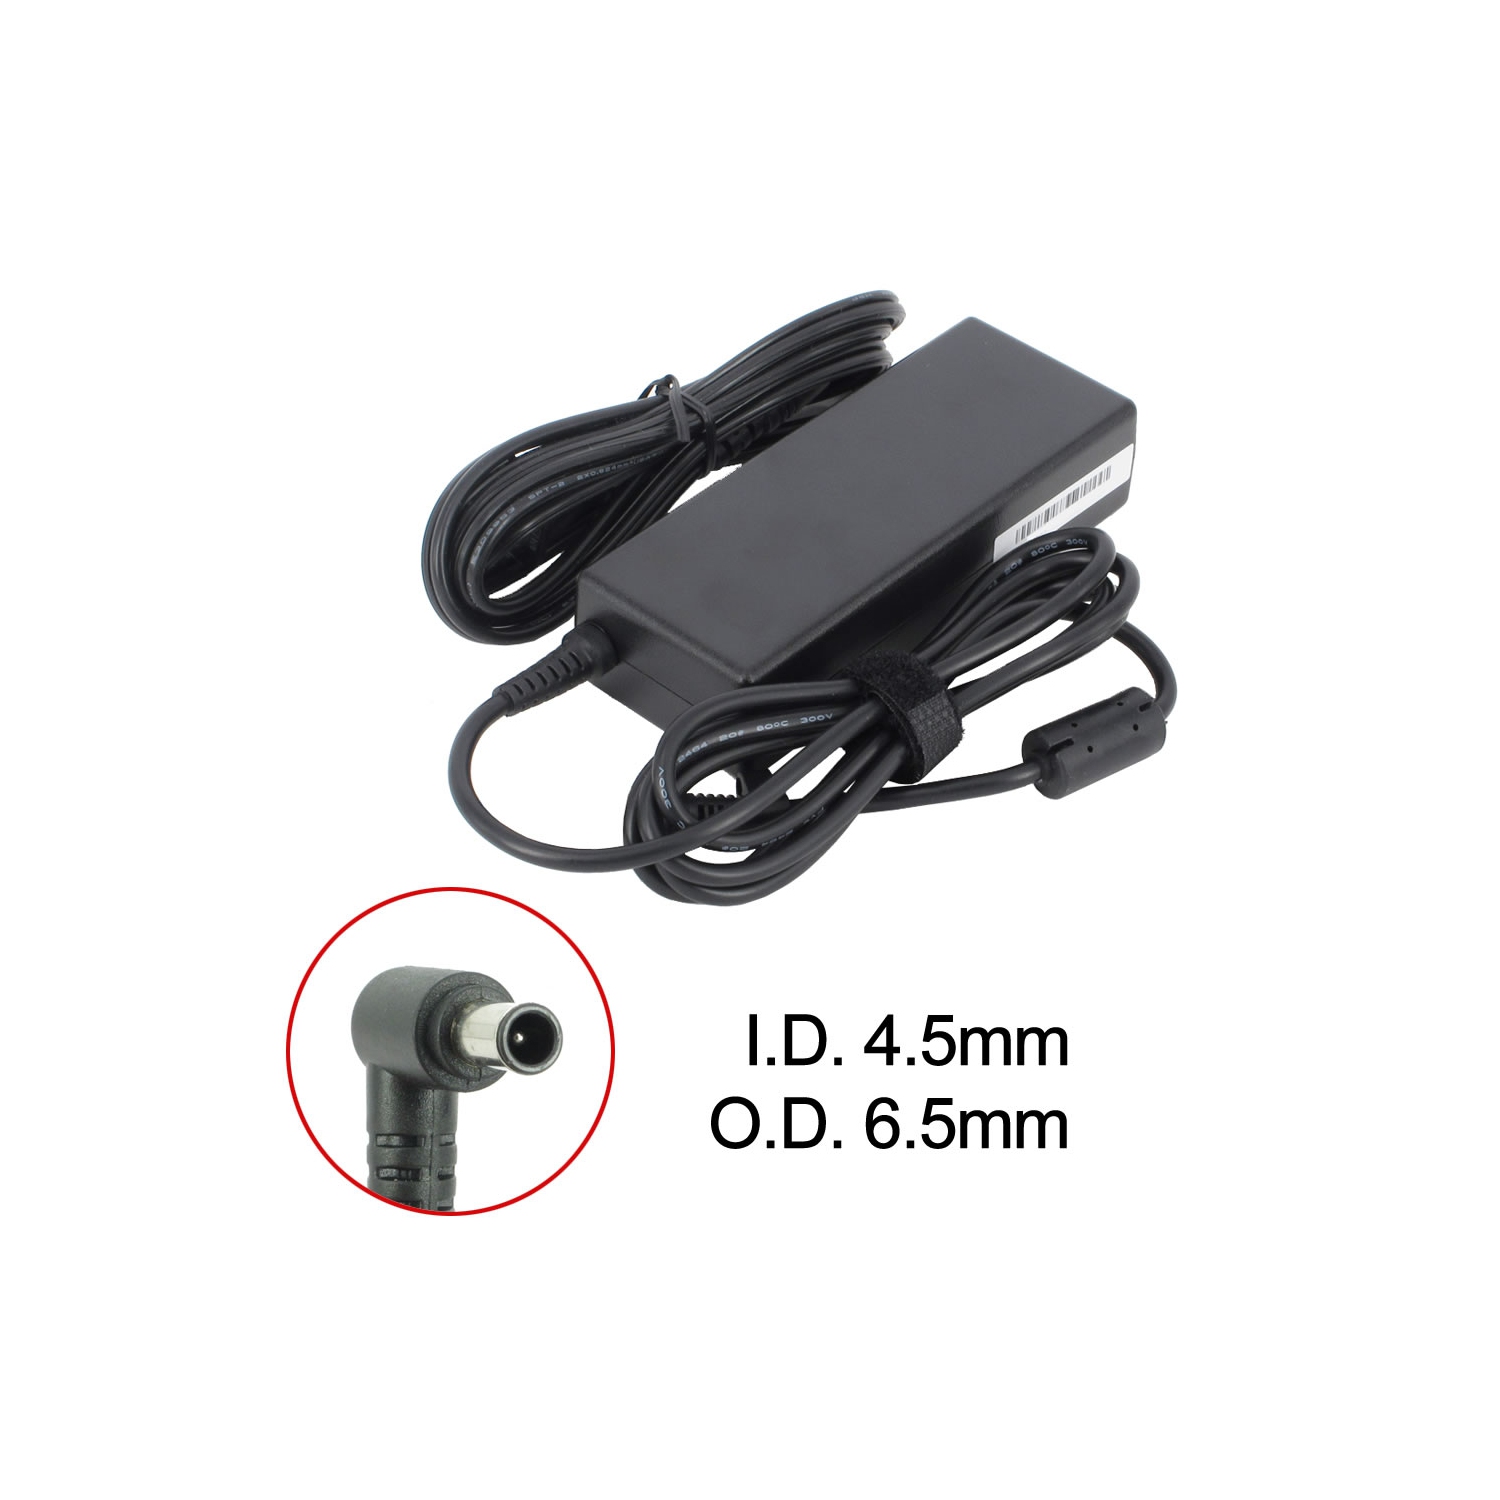 Brand New Laptop AC Adapter for LG XNOTE XD170, ADP-90TH A, PCGA-AC19V19, VGP-AC19V14, VGP-AC19V26, VGP-AC19V43